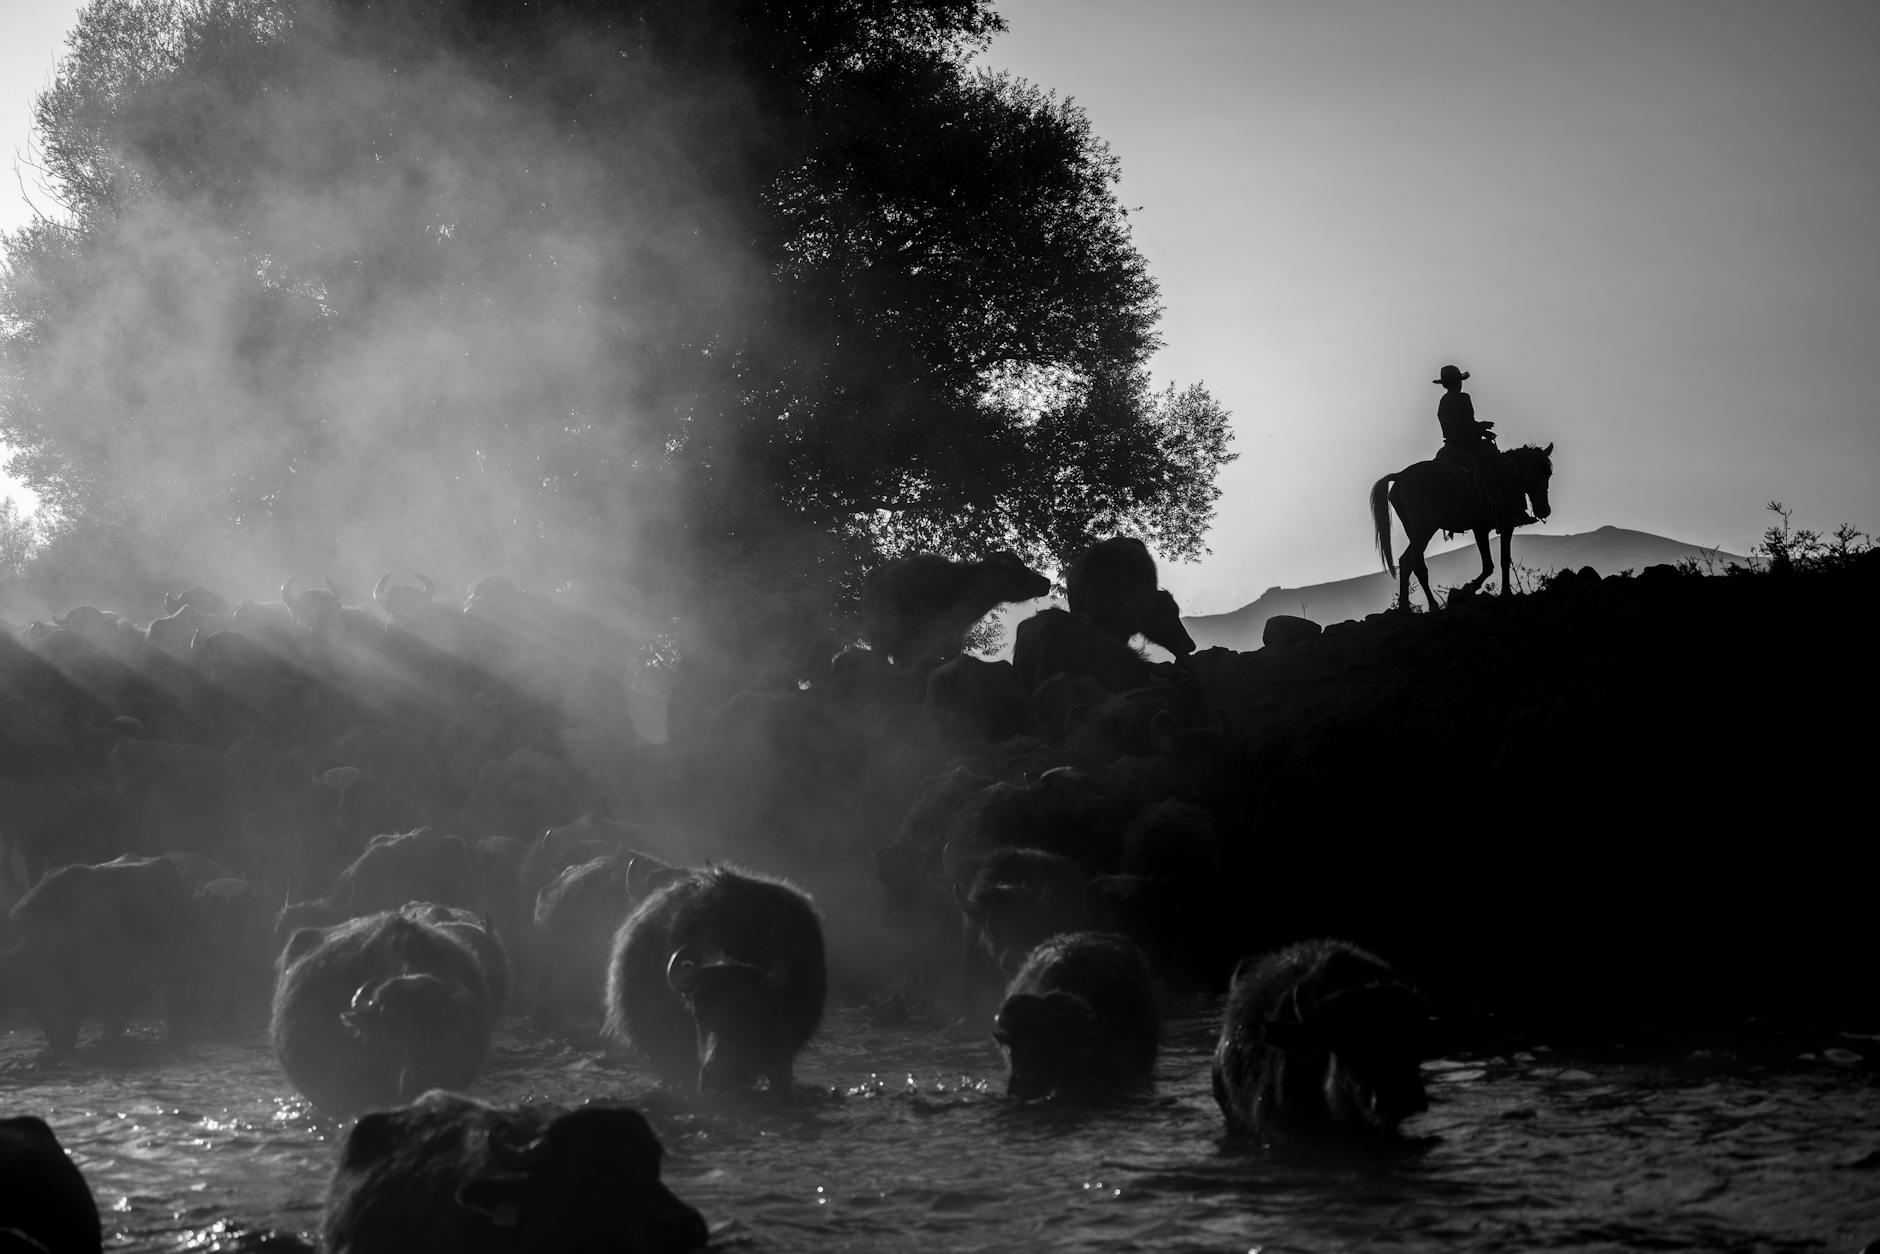 black and white photograph of cows in a river and silhouette of a man on a horse